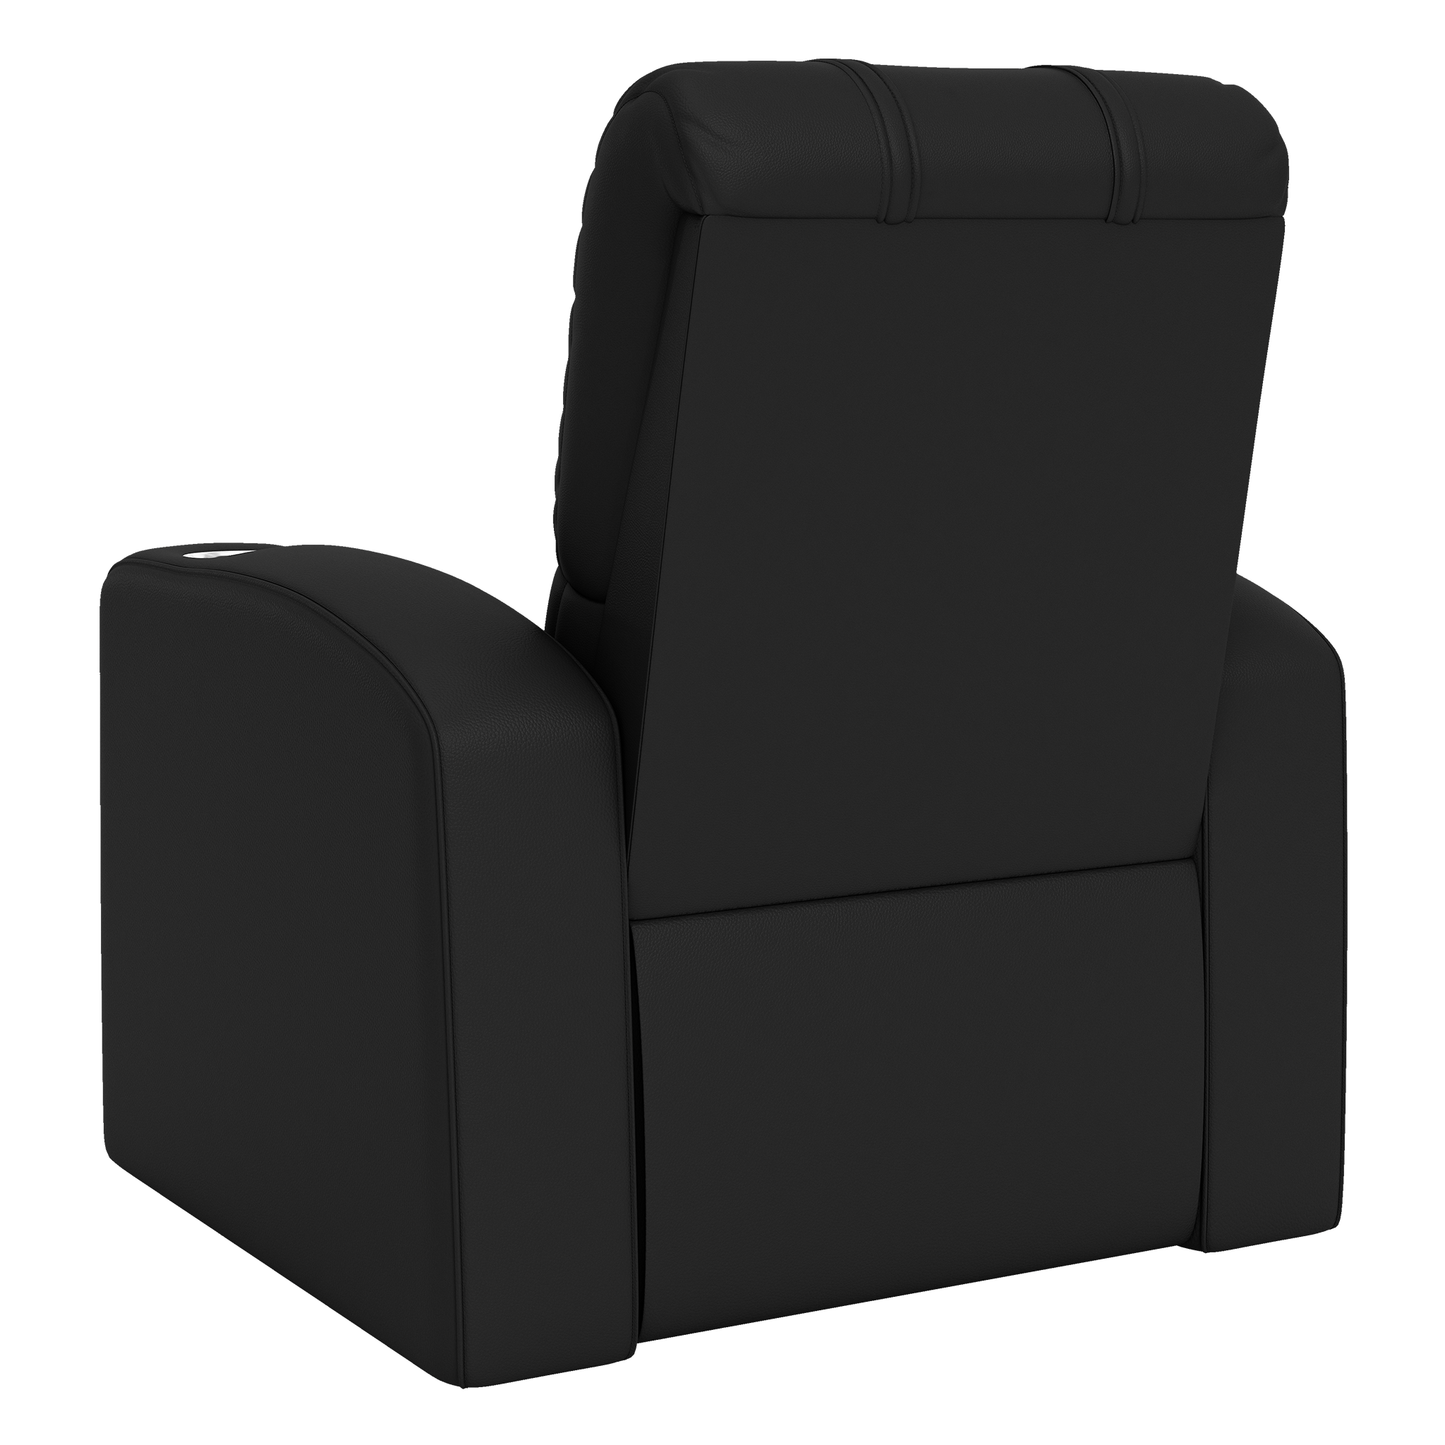 Relax Home Theater Recliner with Vegas Golden Knights with Secondary Logo